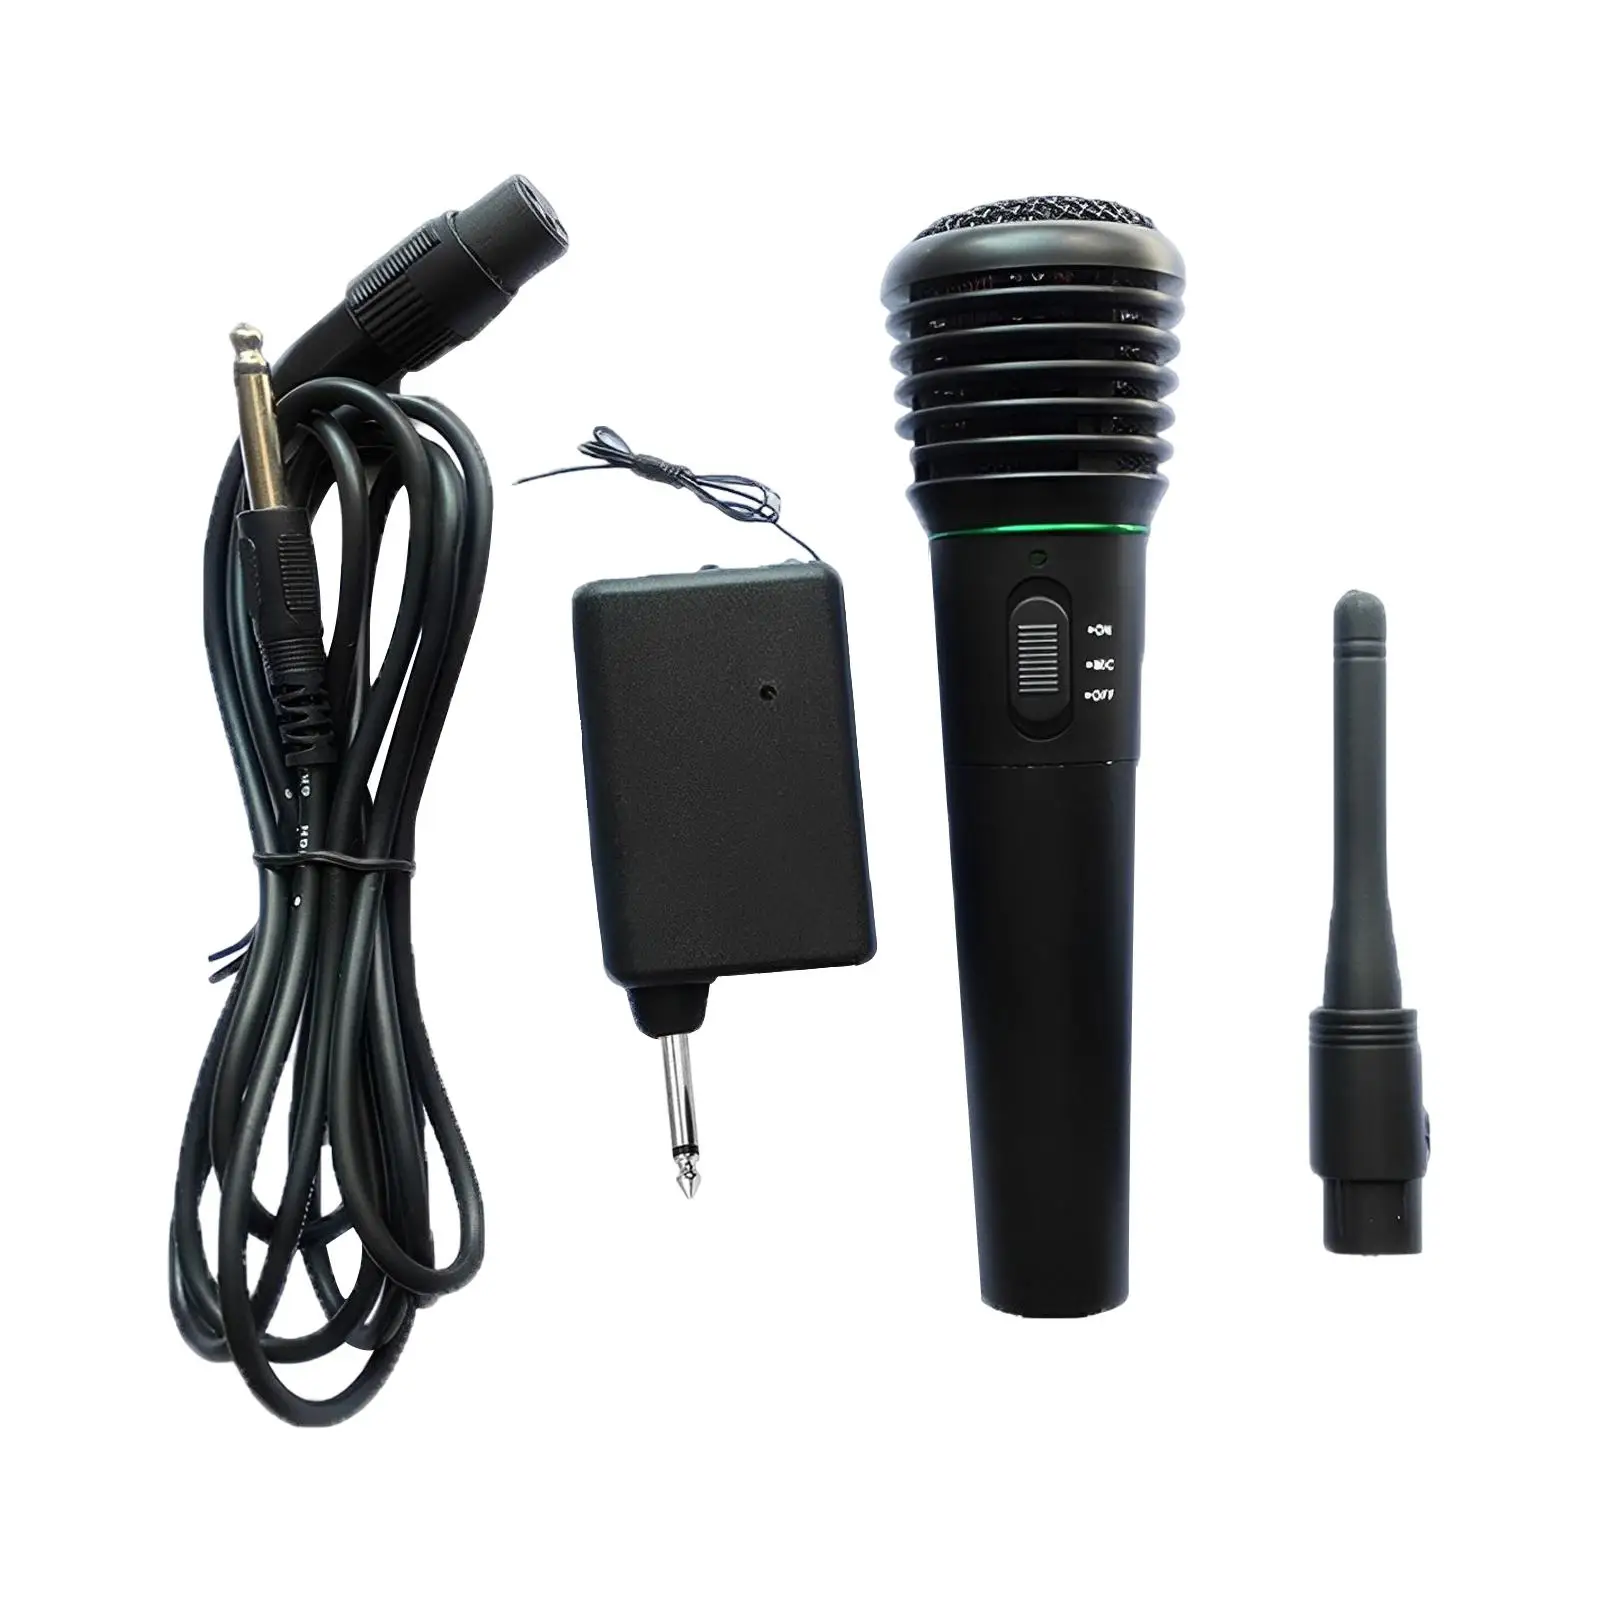 Handheld Cordless Dynamic Mic 2 in 1 with Receiver Vocal Microphone Wired Microphone for Audio Home KTV Tablet Computer Laptop